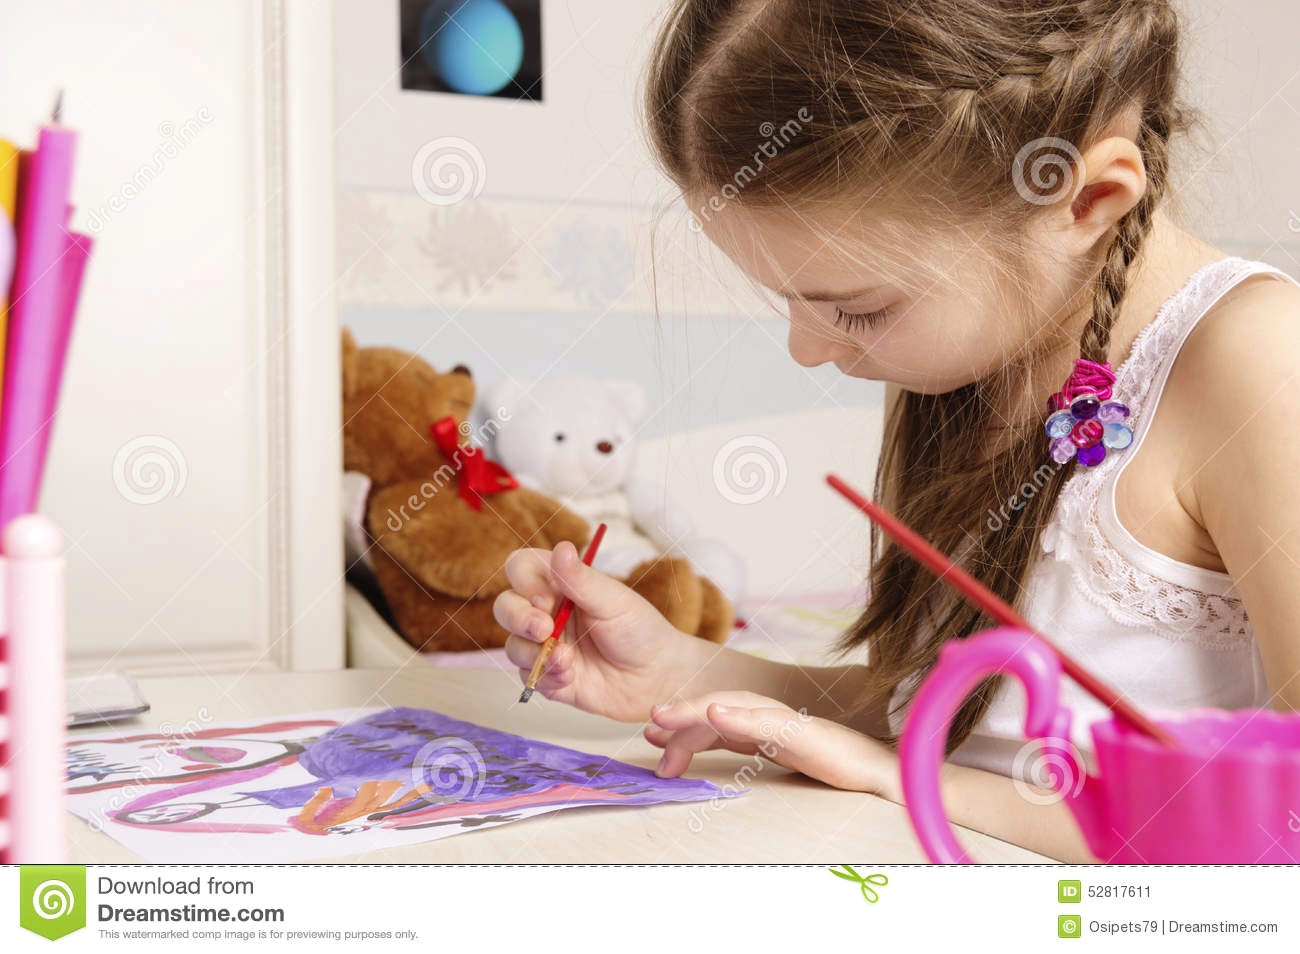 portrait of young girl of 6 or 7 years old she is pretty pig tailed brunette girl is sitting behind table and drawing picture with paints